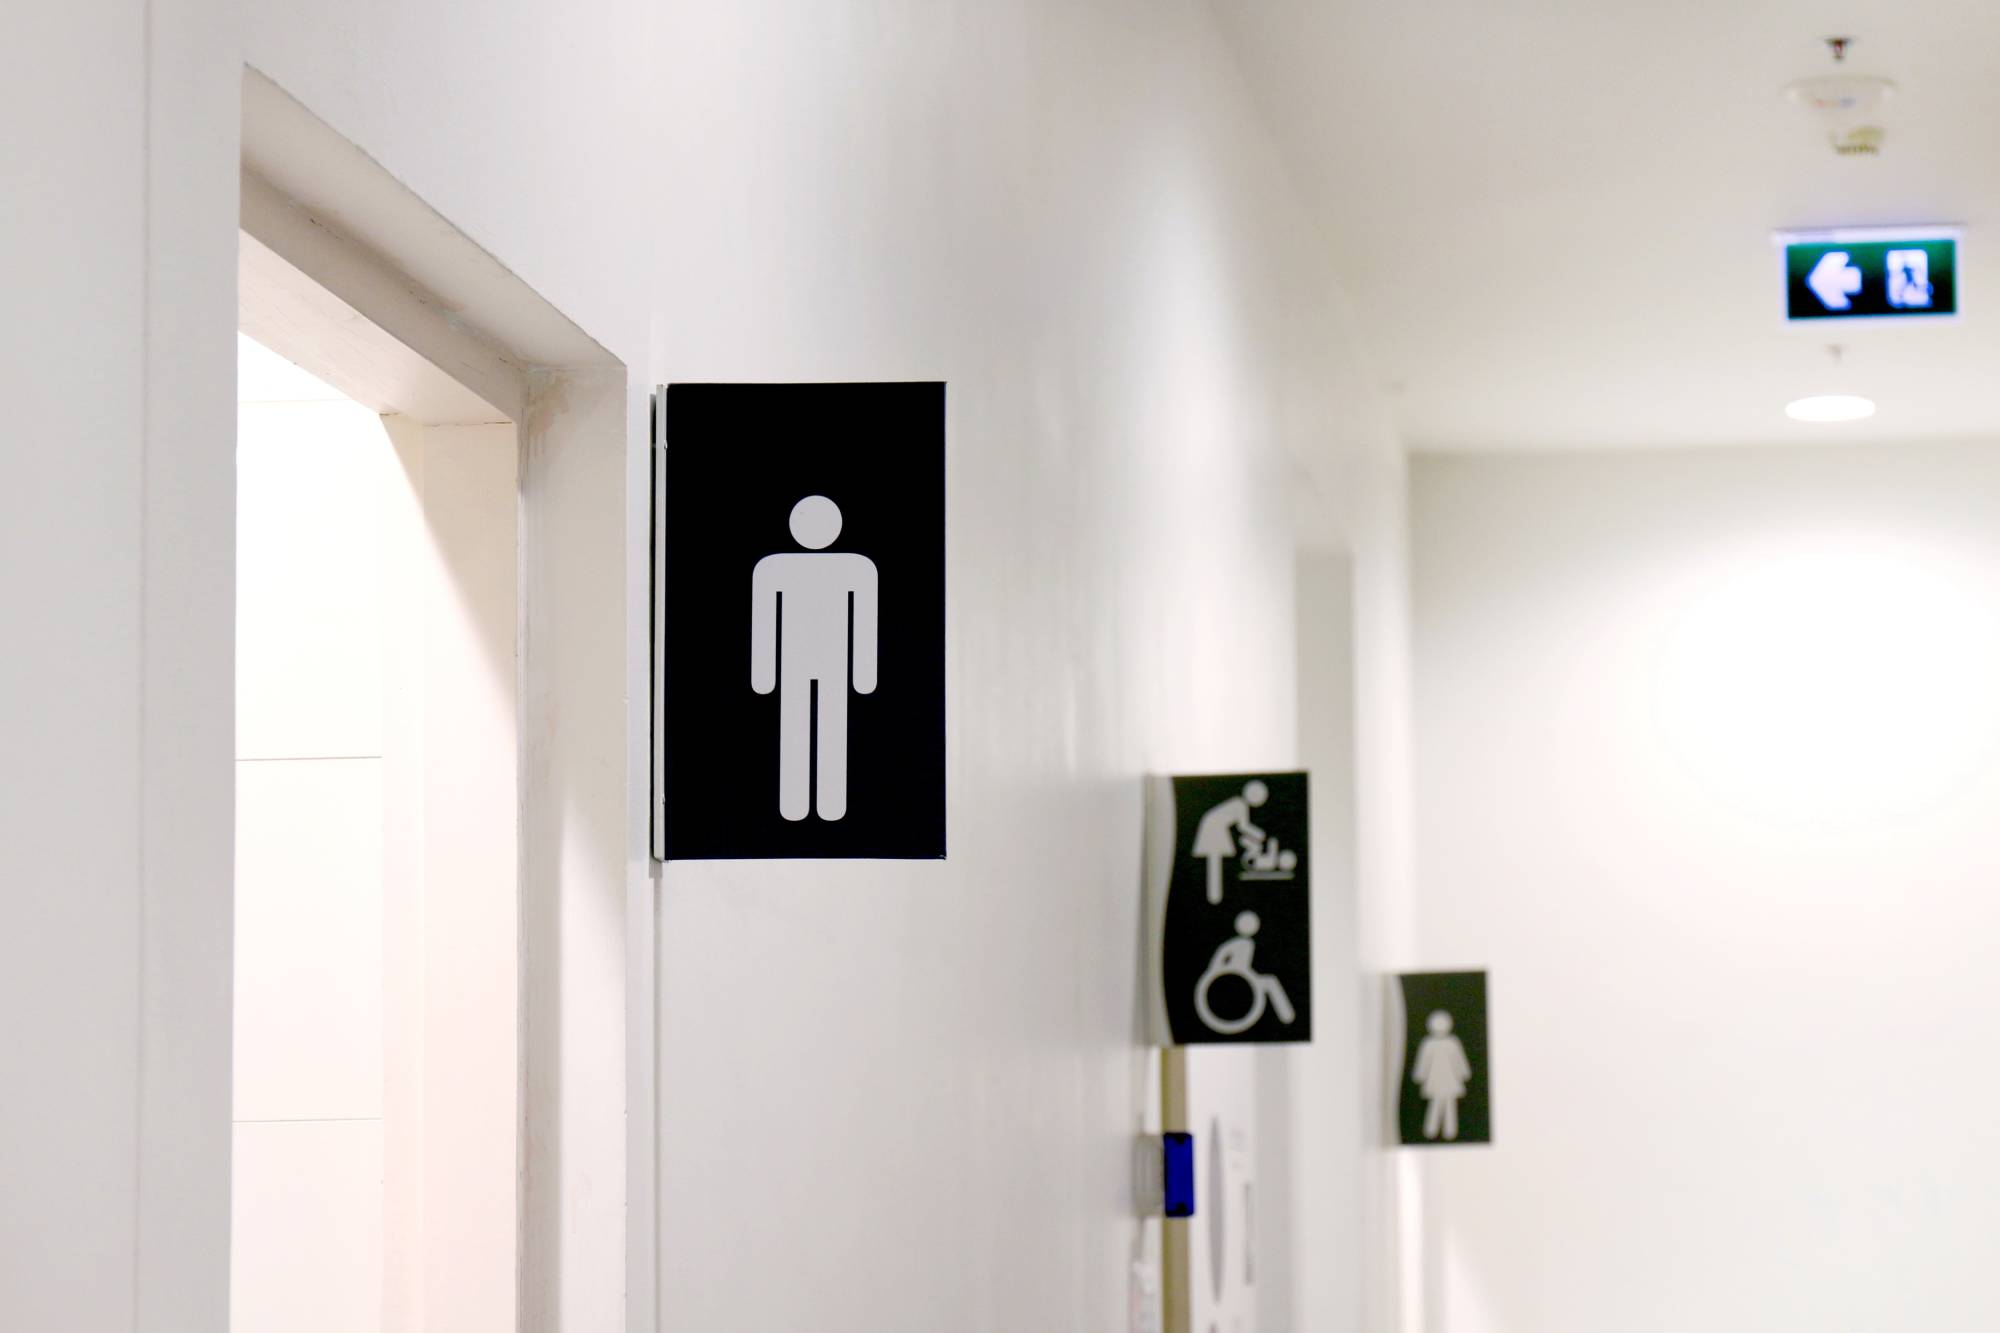 Terabee Blog Use anonymous people counting data to improve restroom management